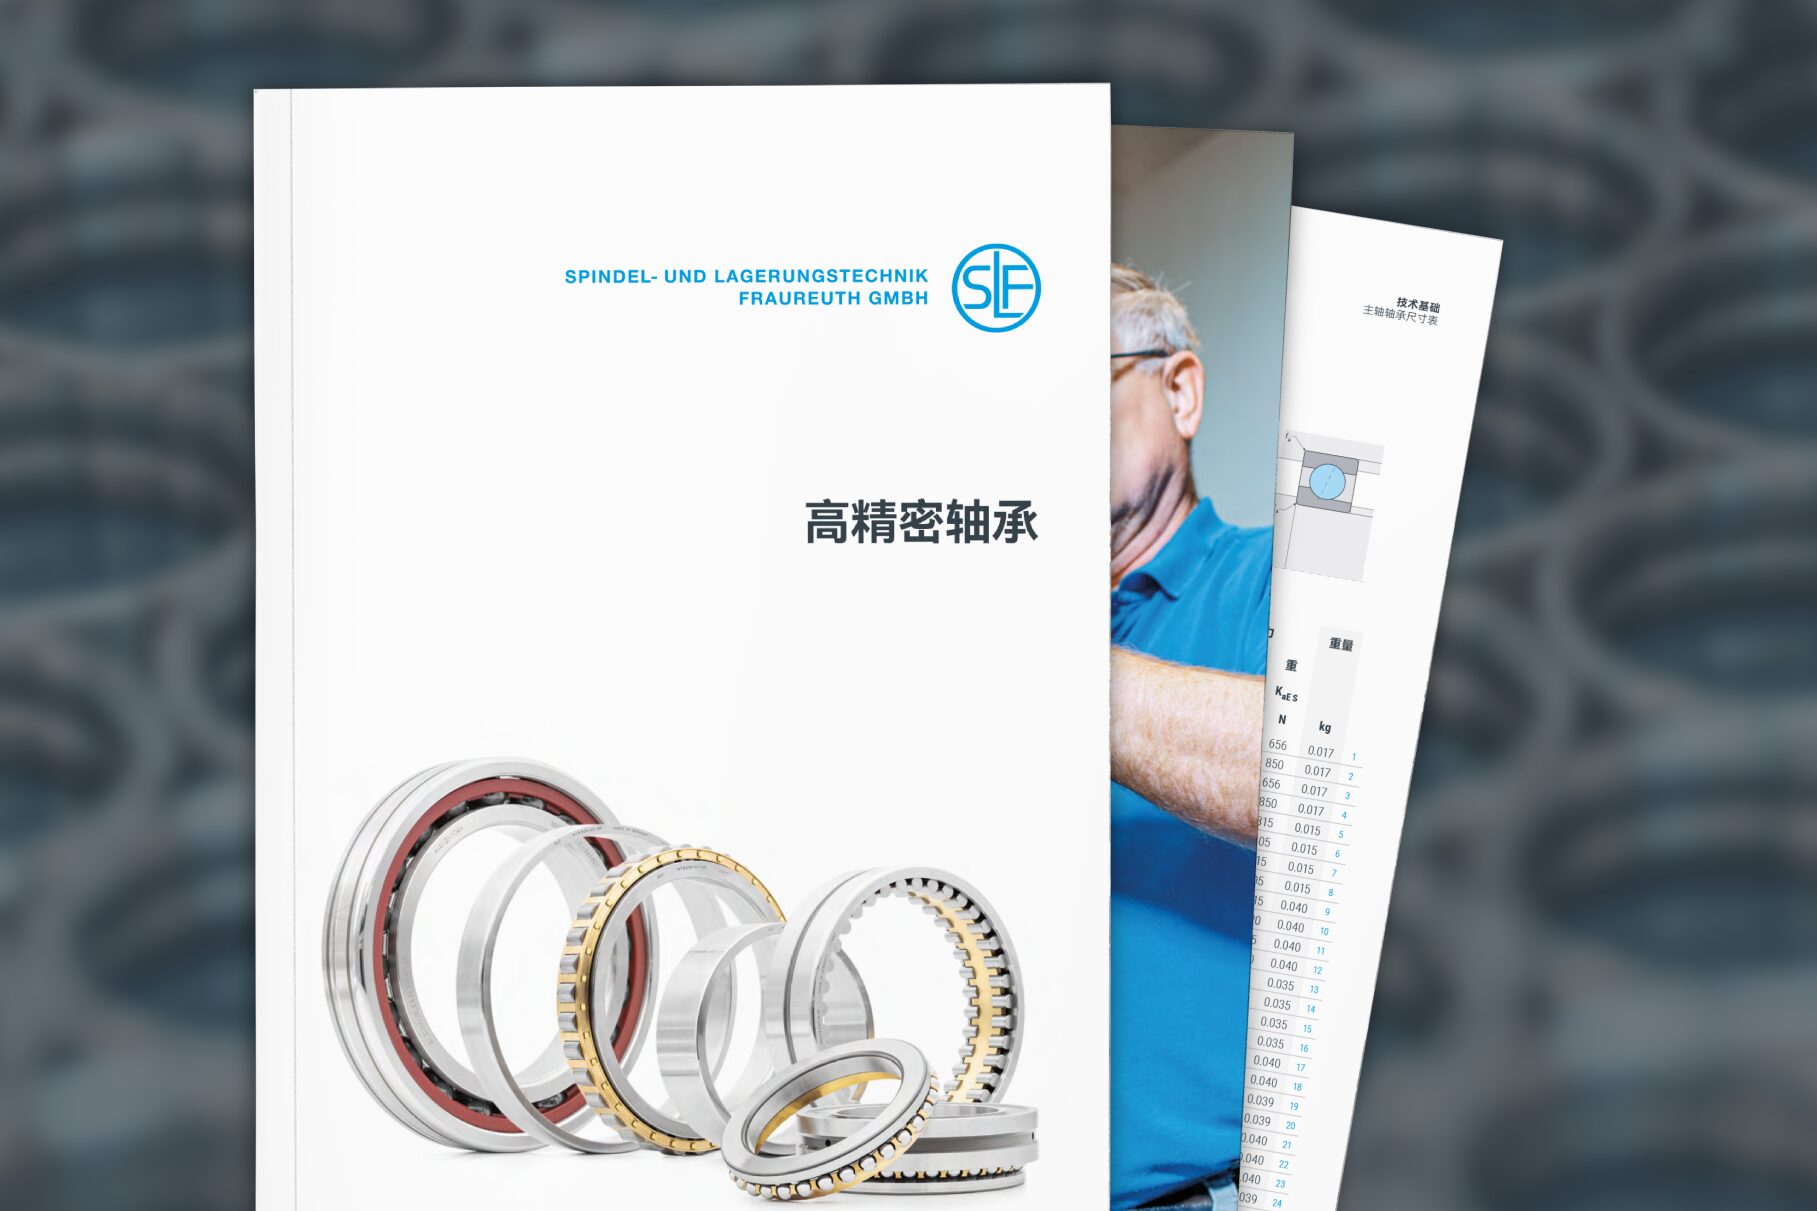 The new high-precision bearings product catalogue from SLF Fraureuth is illustrated against a background of various bearings.